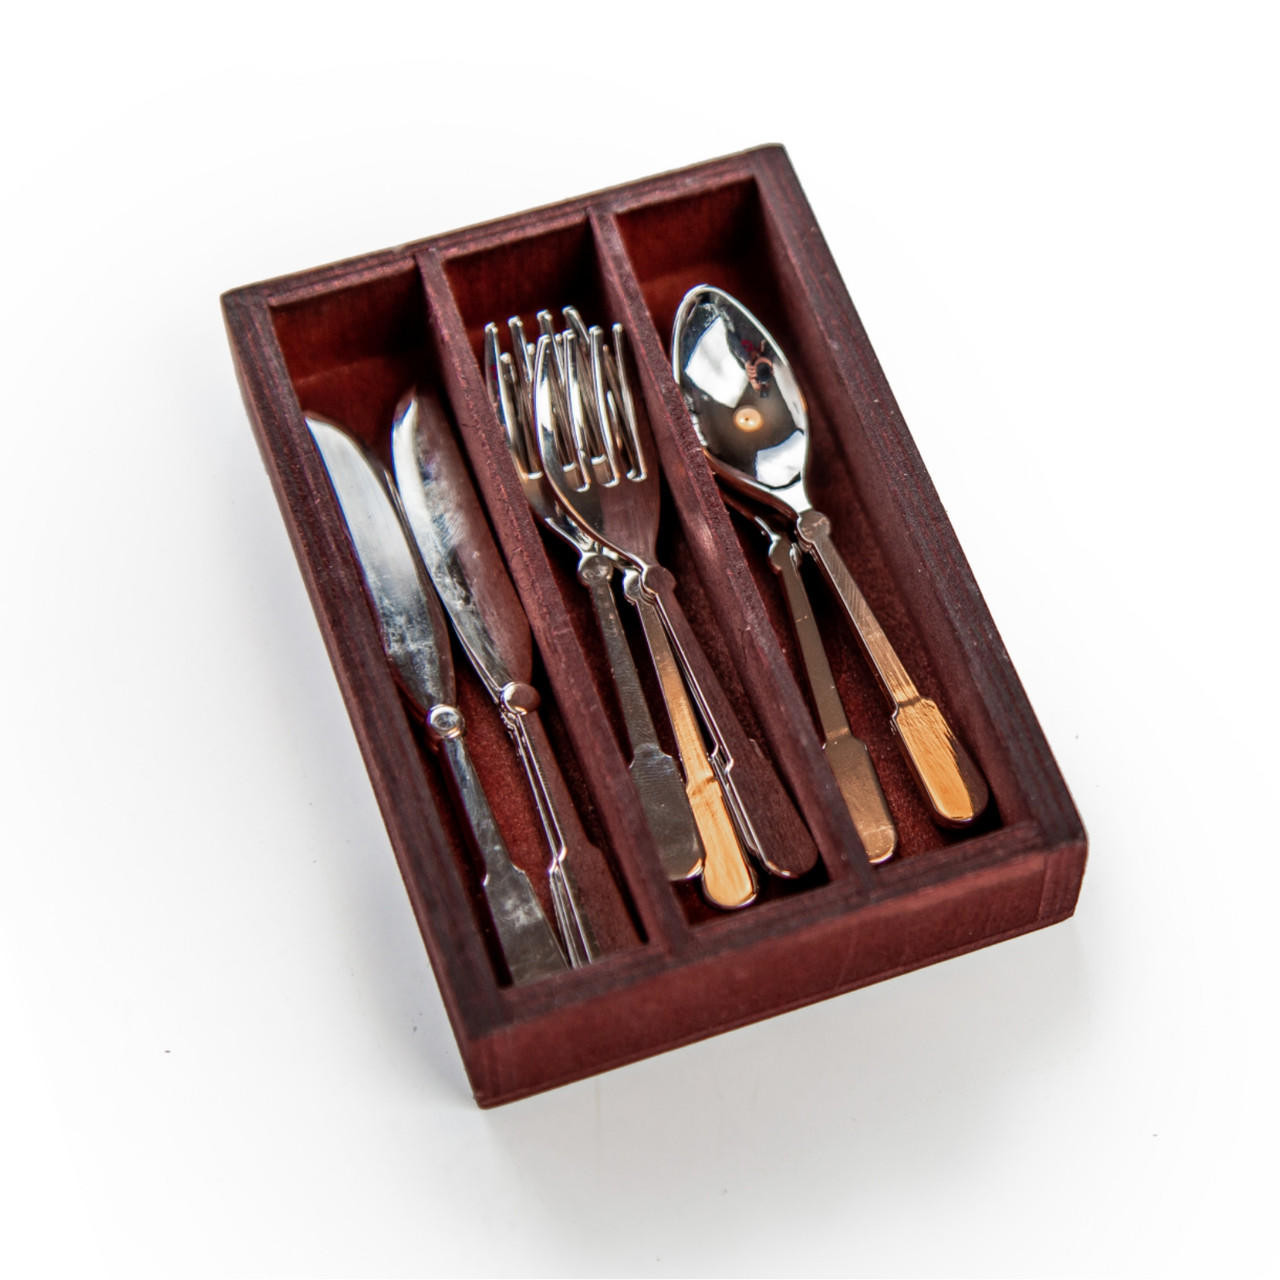 13-Piece Silverware Set with Wooden Holder, for 18Inch Doll